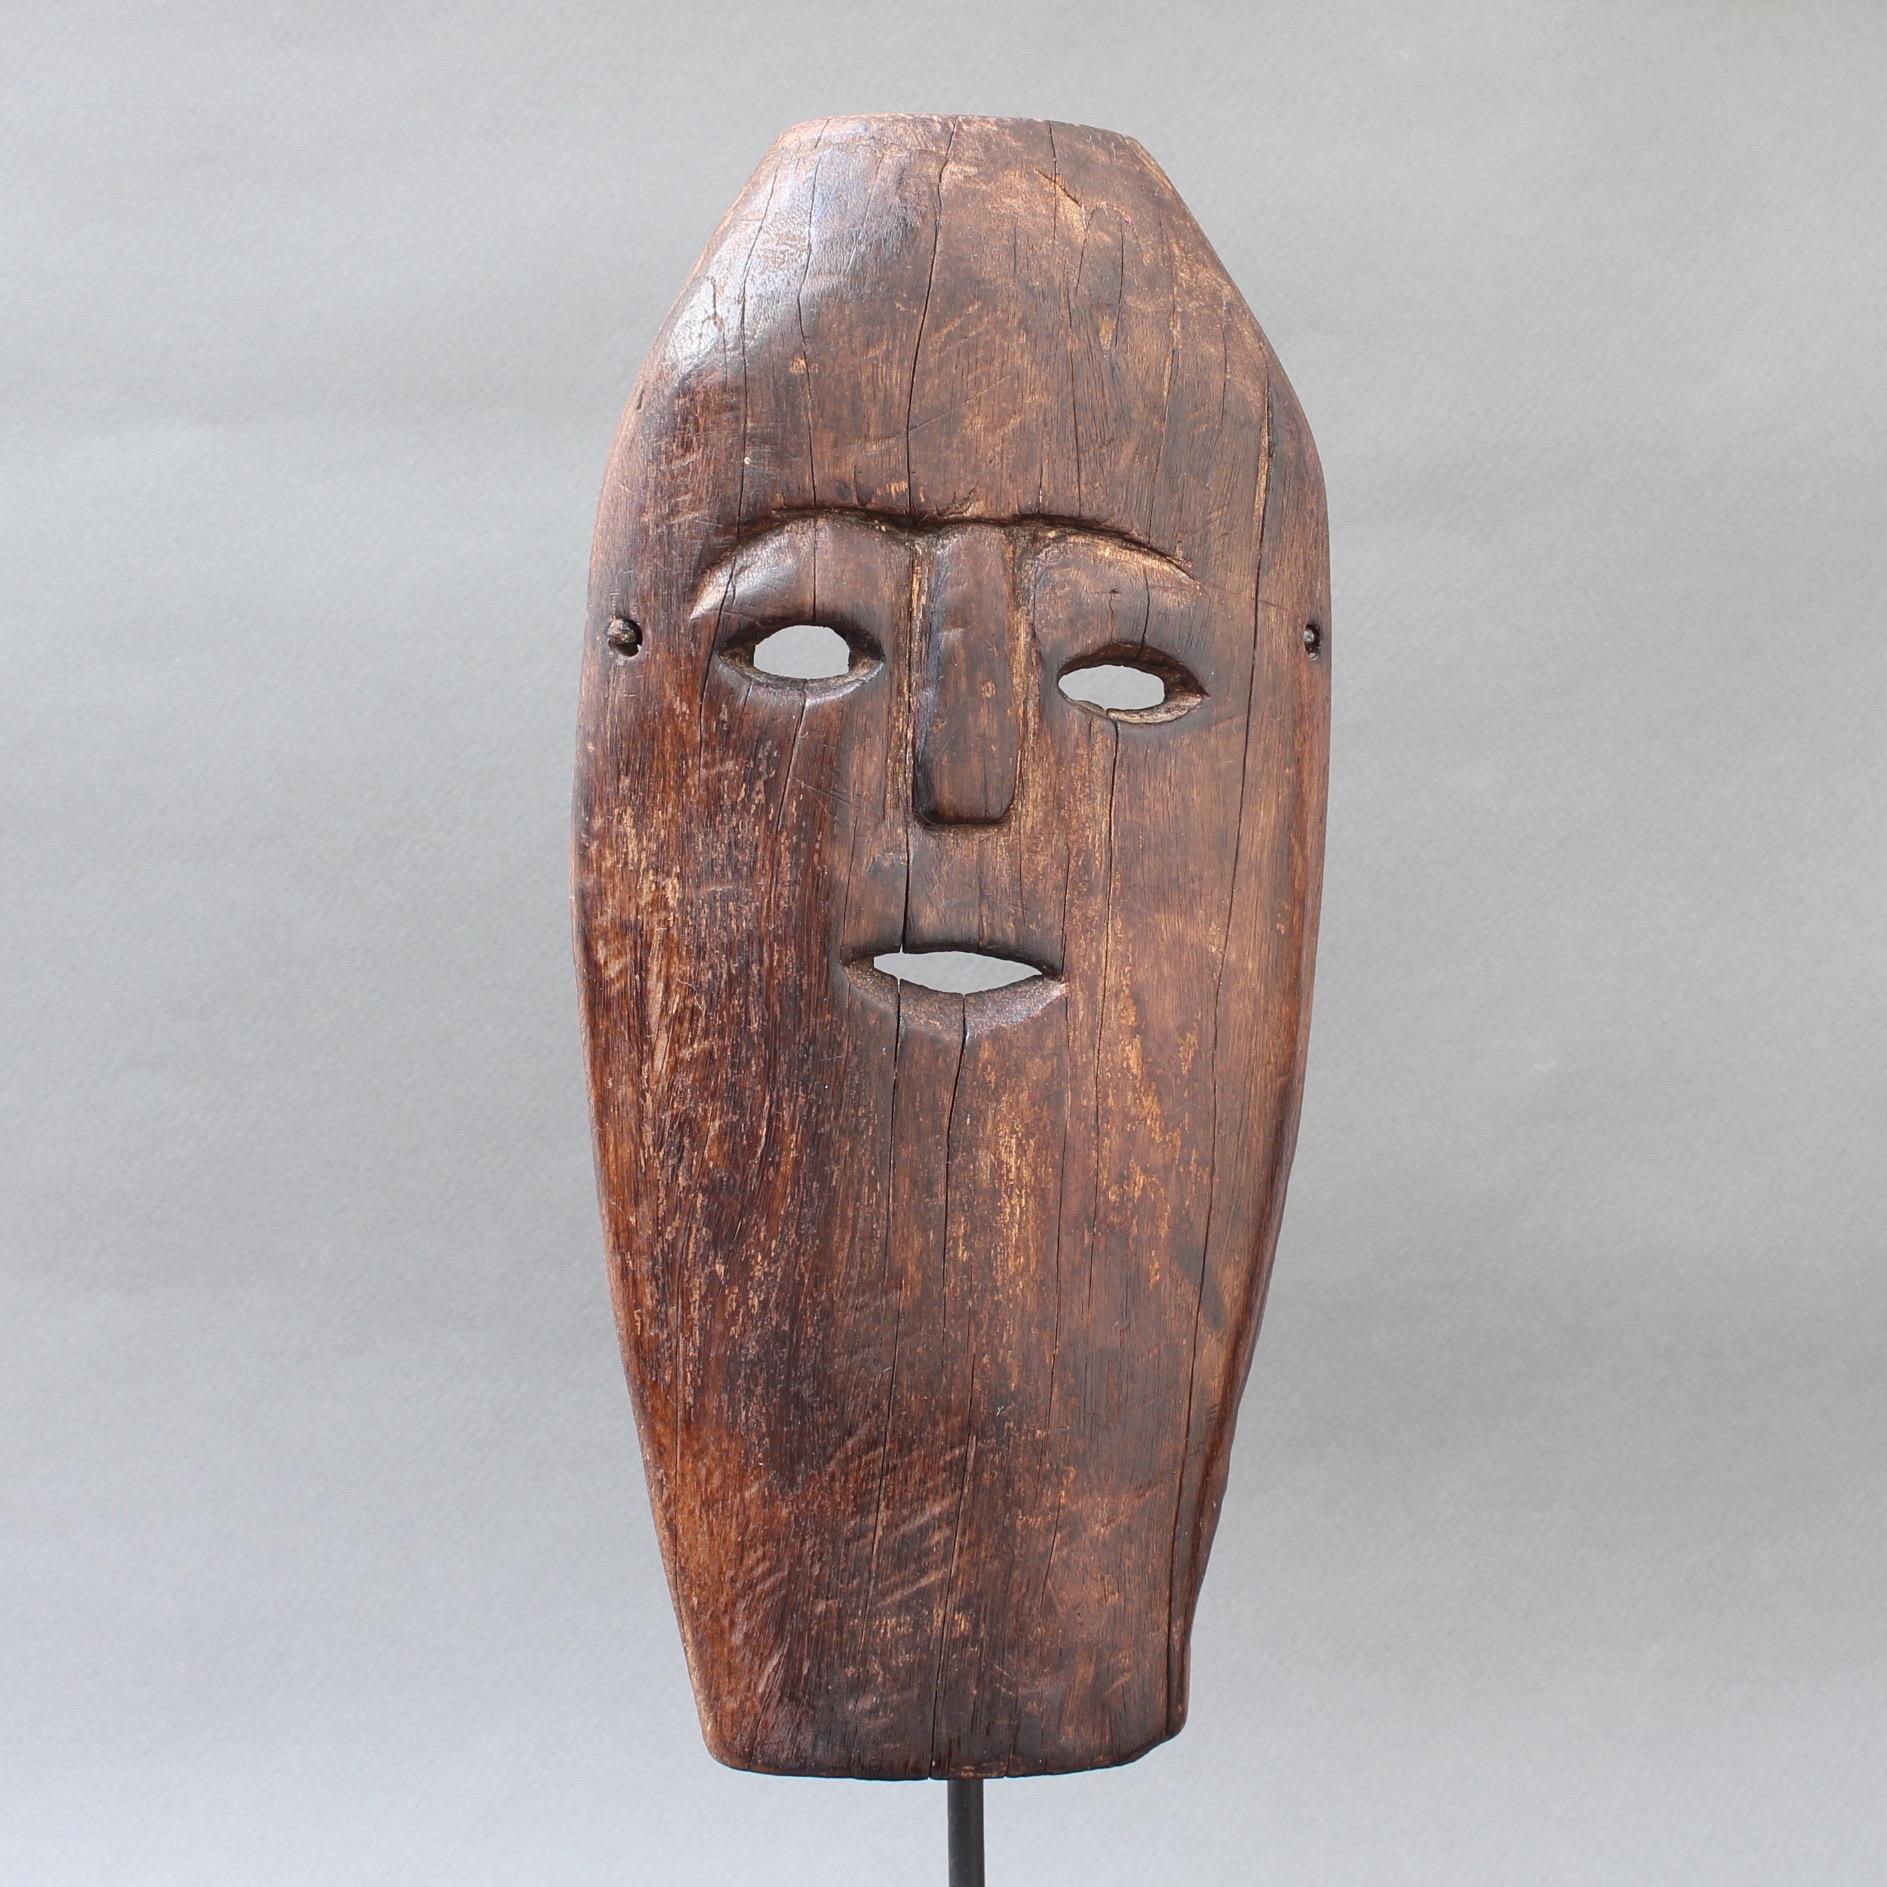 Midcentury Sculpted Wooden Traditional Mask from Timor Island, Indonesia 1